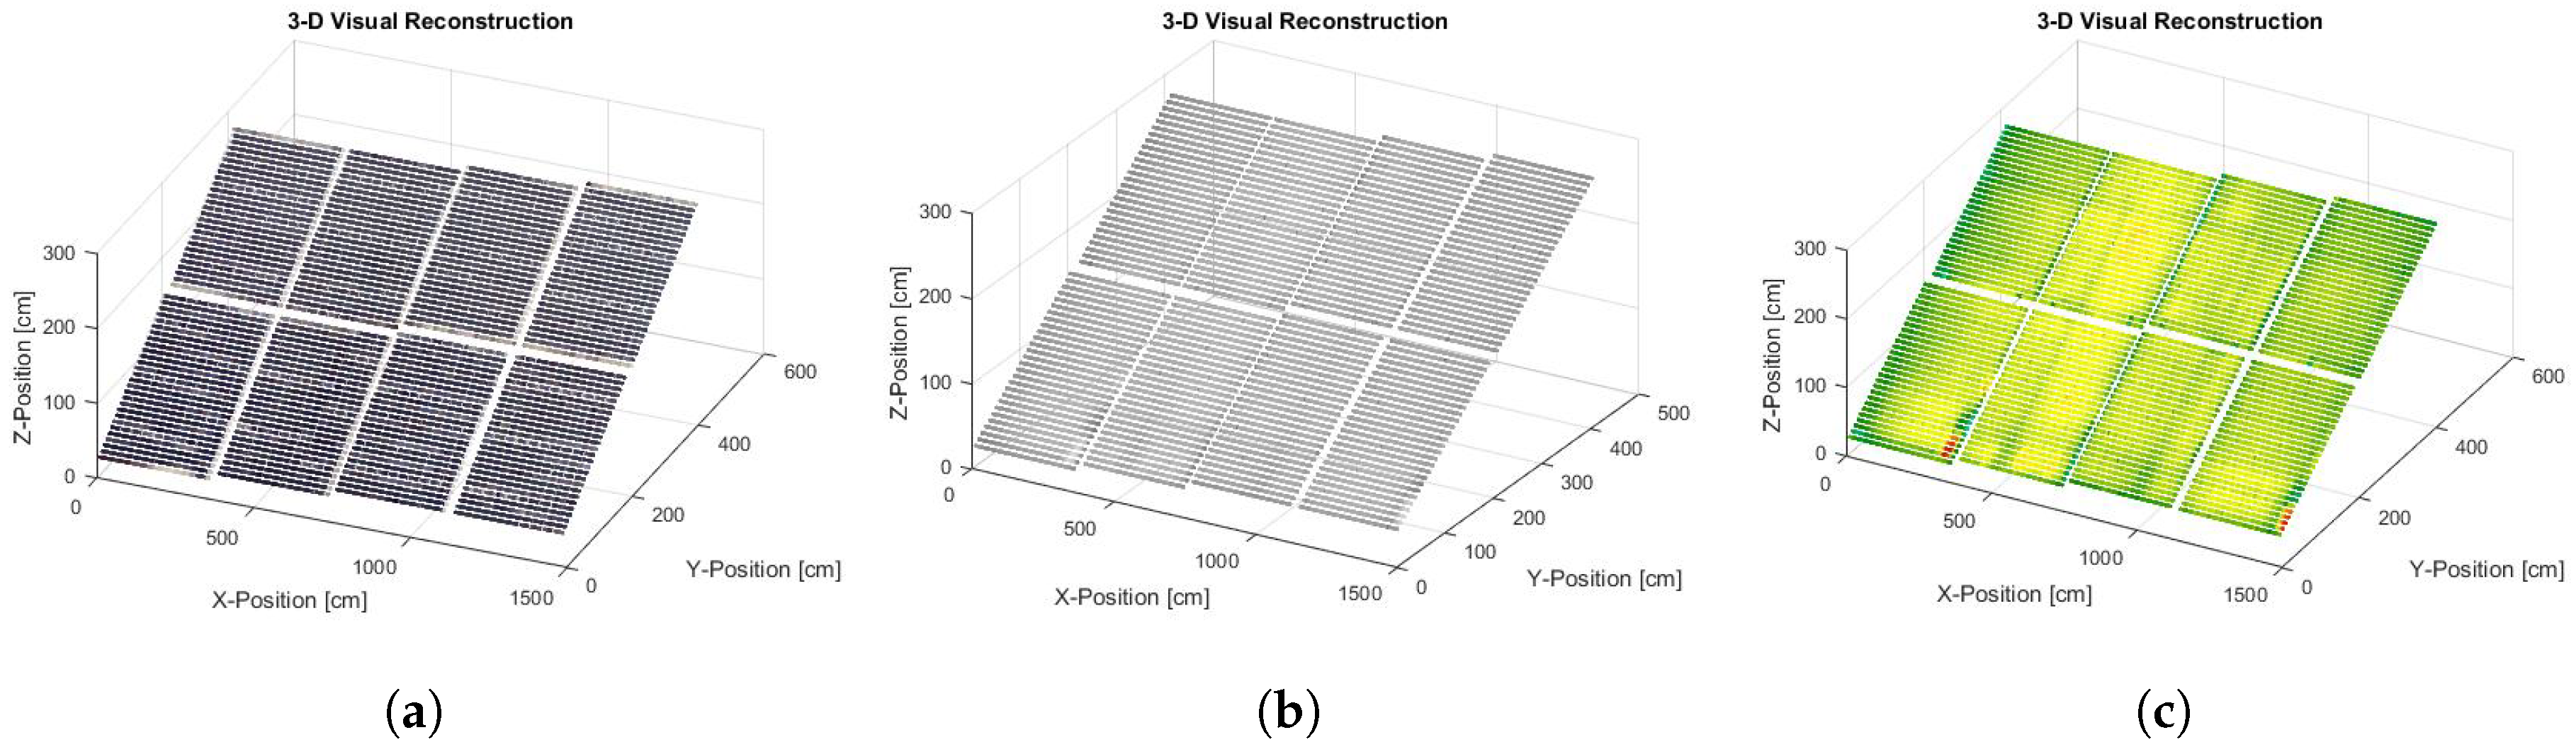 Energies Free Full Text Photovoltaic Modules Diagnosis Using Artificial Vision Techniques For Artifact Minimization Html